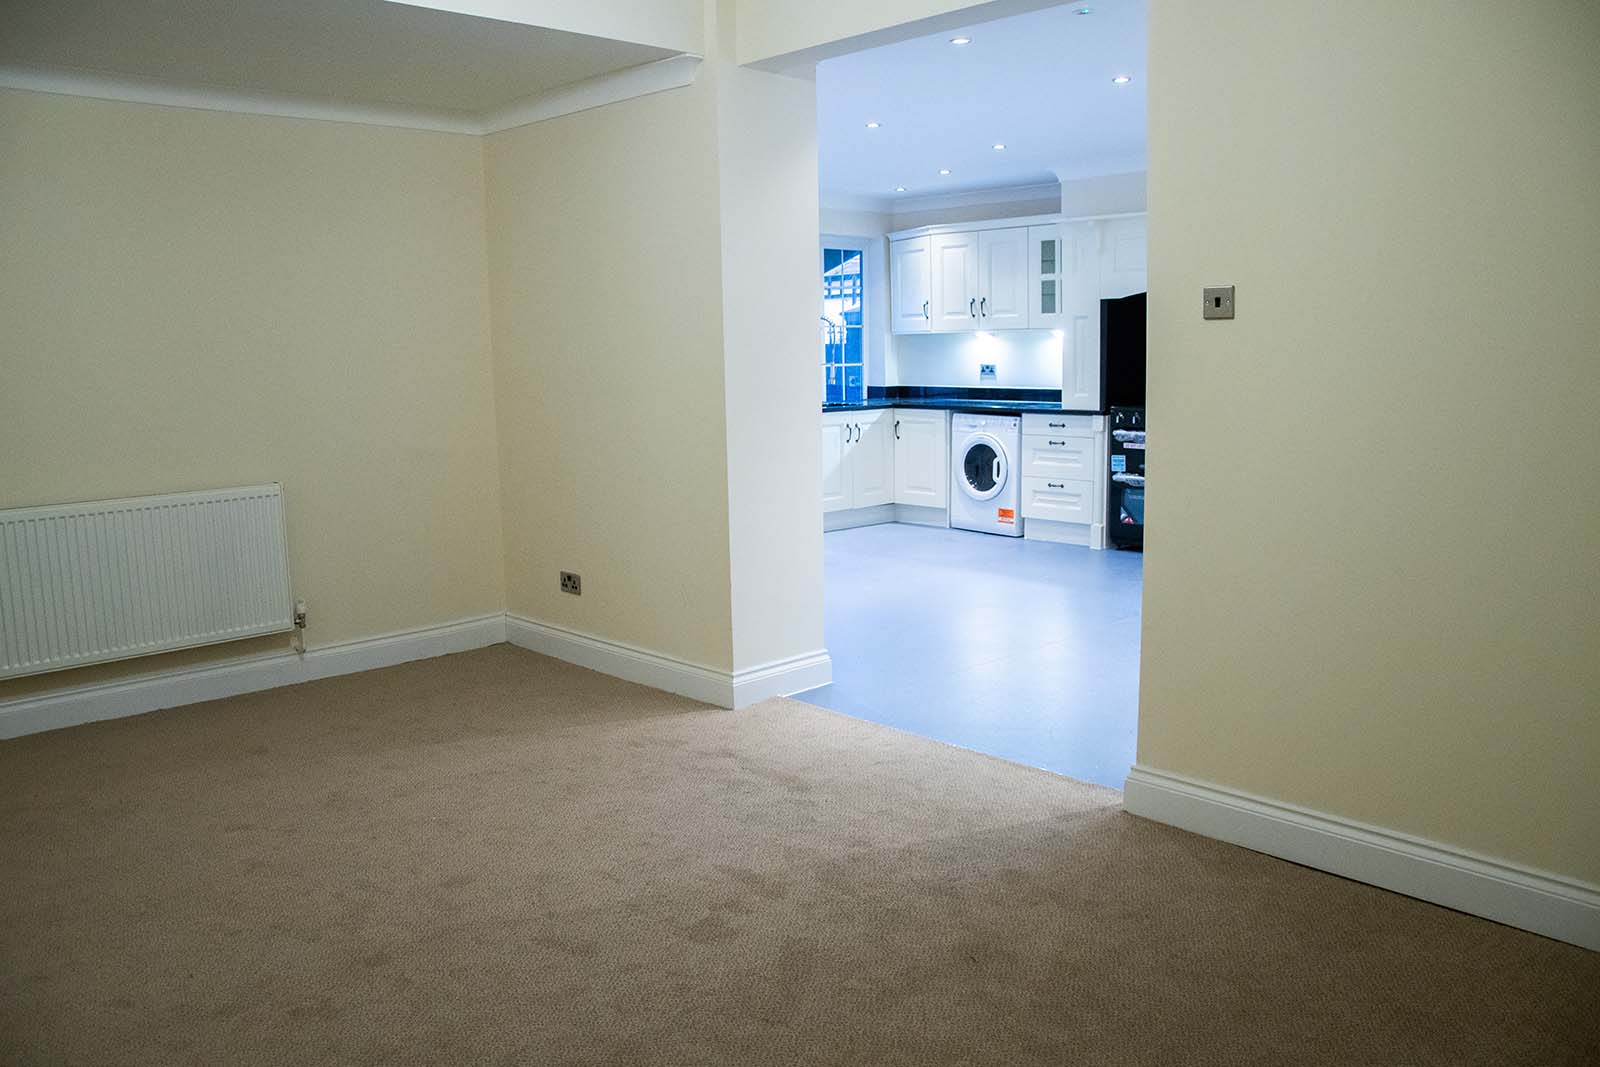 Empty carpeted room leading into the brightly-lit kitchen